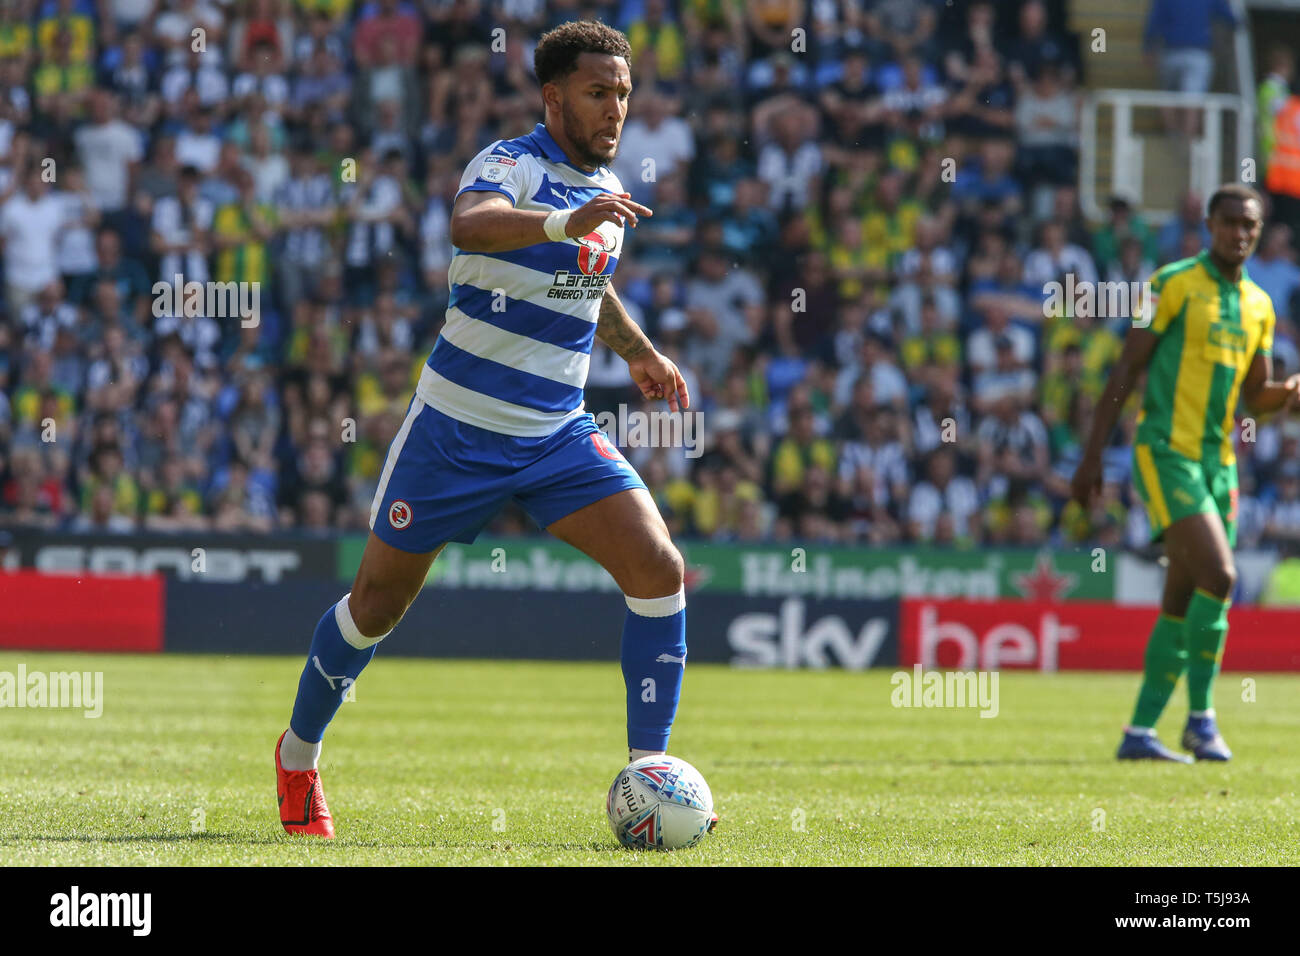 22th April 2019, Madejski Stadium, London, England; Sky Bet Championship, Reading vs  West Brom ; Liam Moore (06) of Reading with the ball   Credit: Matt O'Connor/News Images,  English Football League images are subject to DataCo Licence Stock Photo